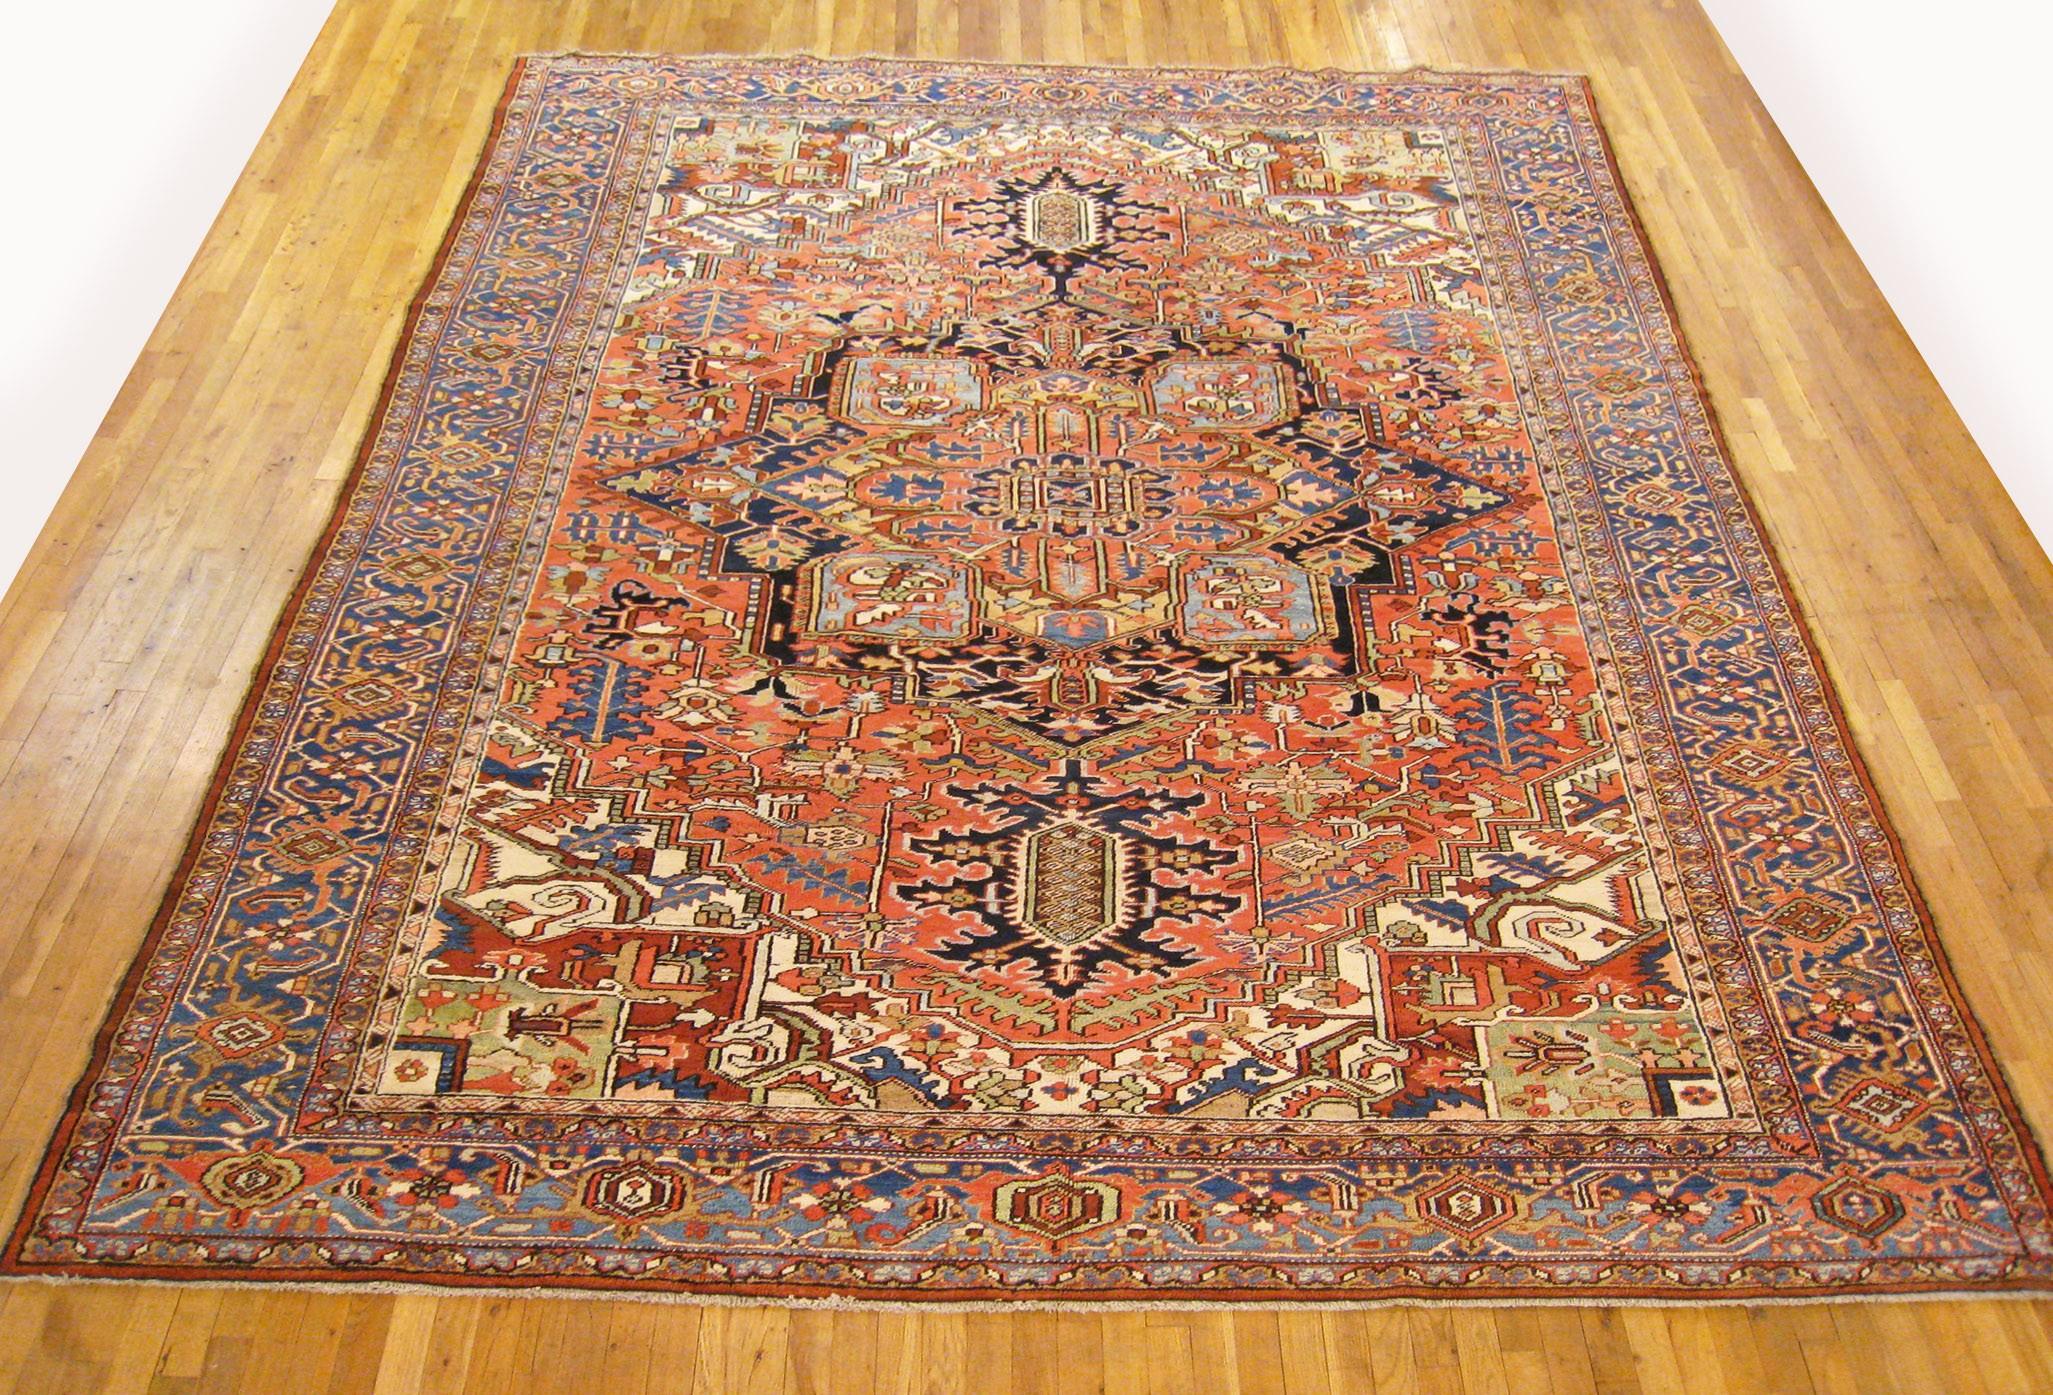 Antique Hand-Knotted Persian Heriz Oriental Carpet

A one-of-a-kind antique Persian Heriz oriental carpet, hand-knotted with medium thickness wool pile. Featuring a central medallion design on the coral primary field, with light blue outer border.